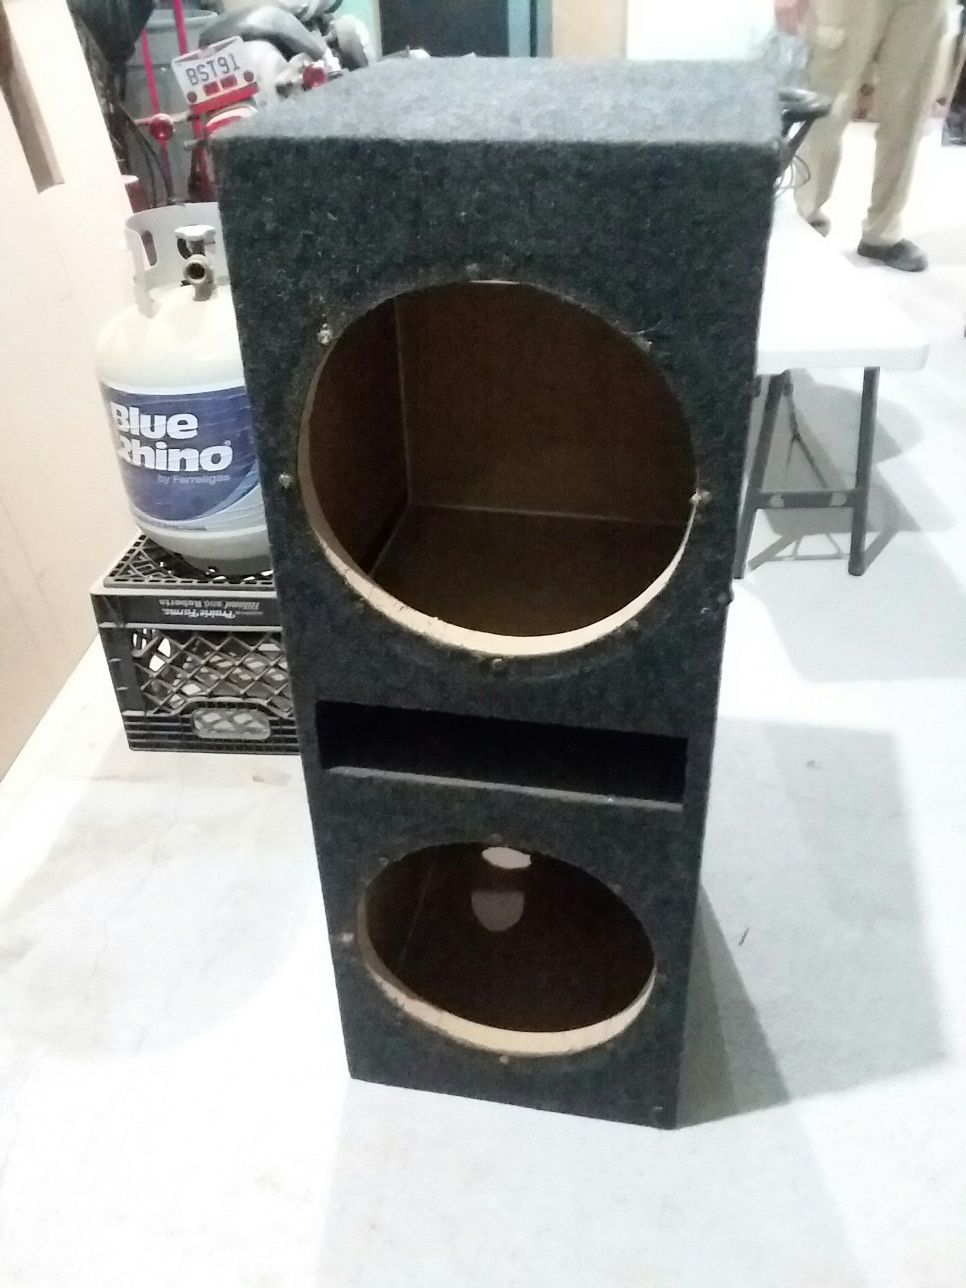 Dual 12 inch subwoofer box.